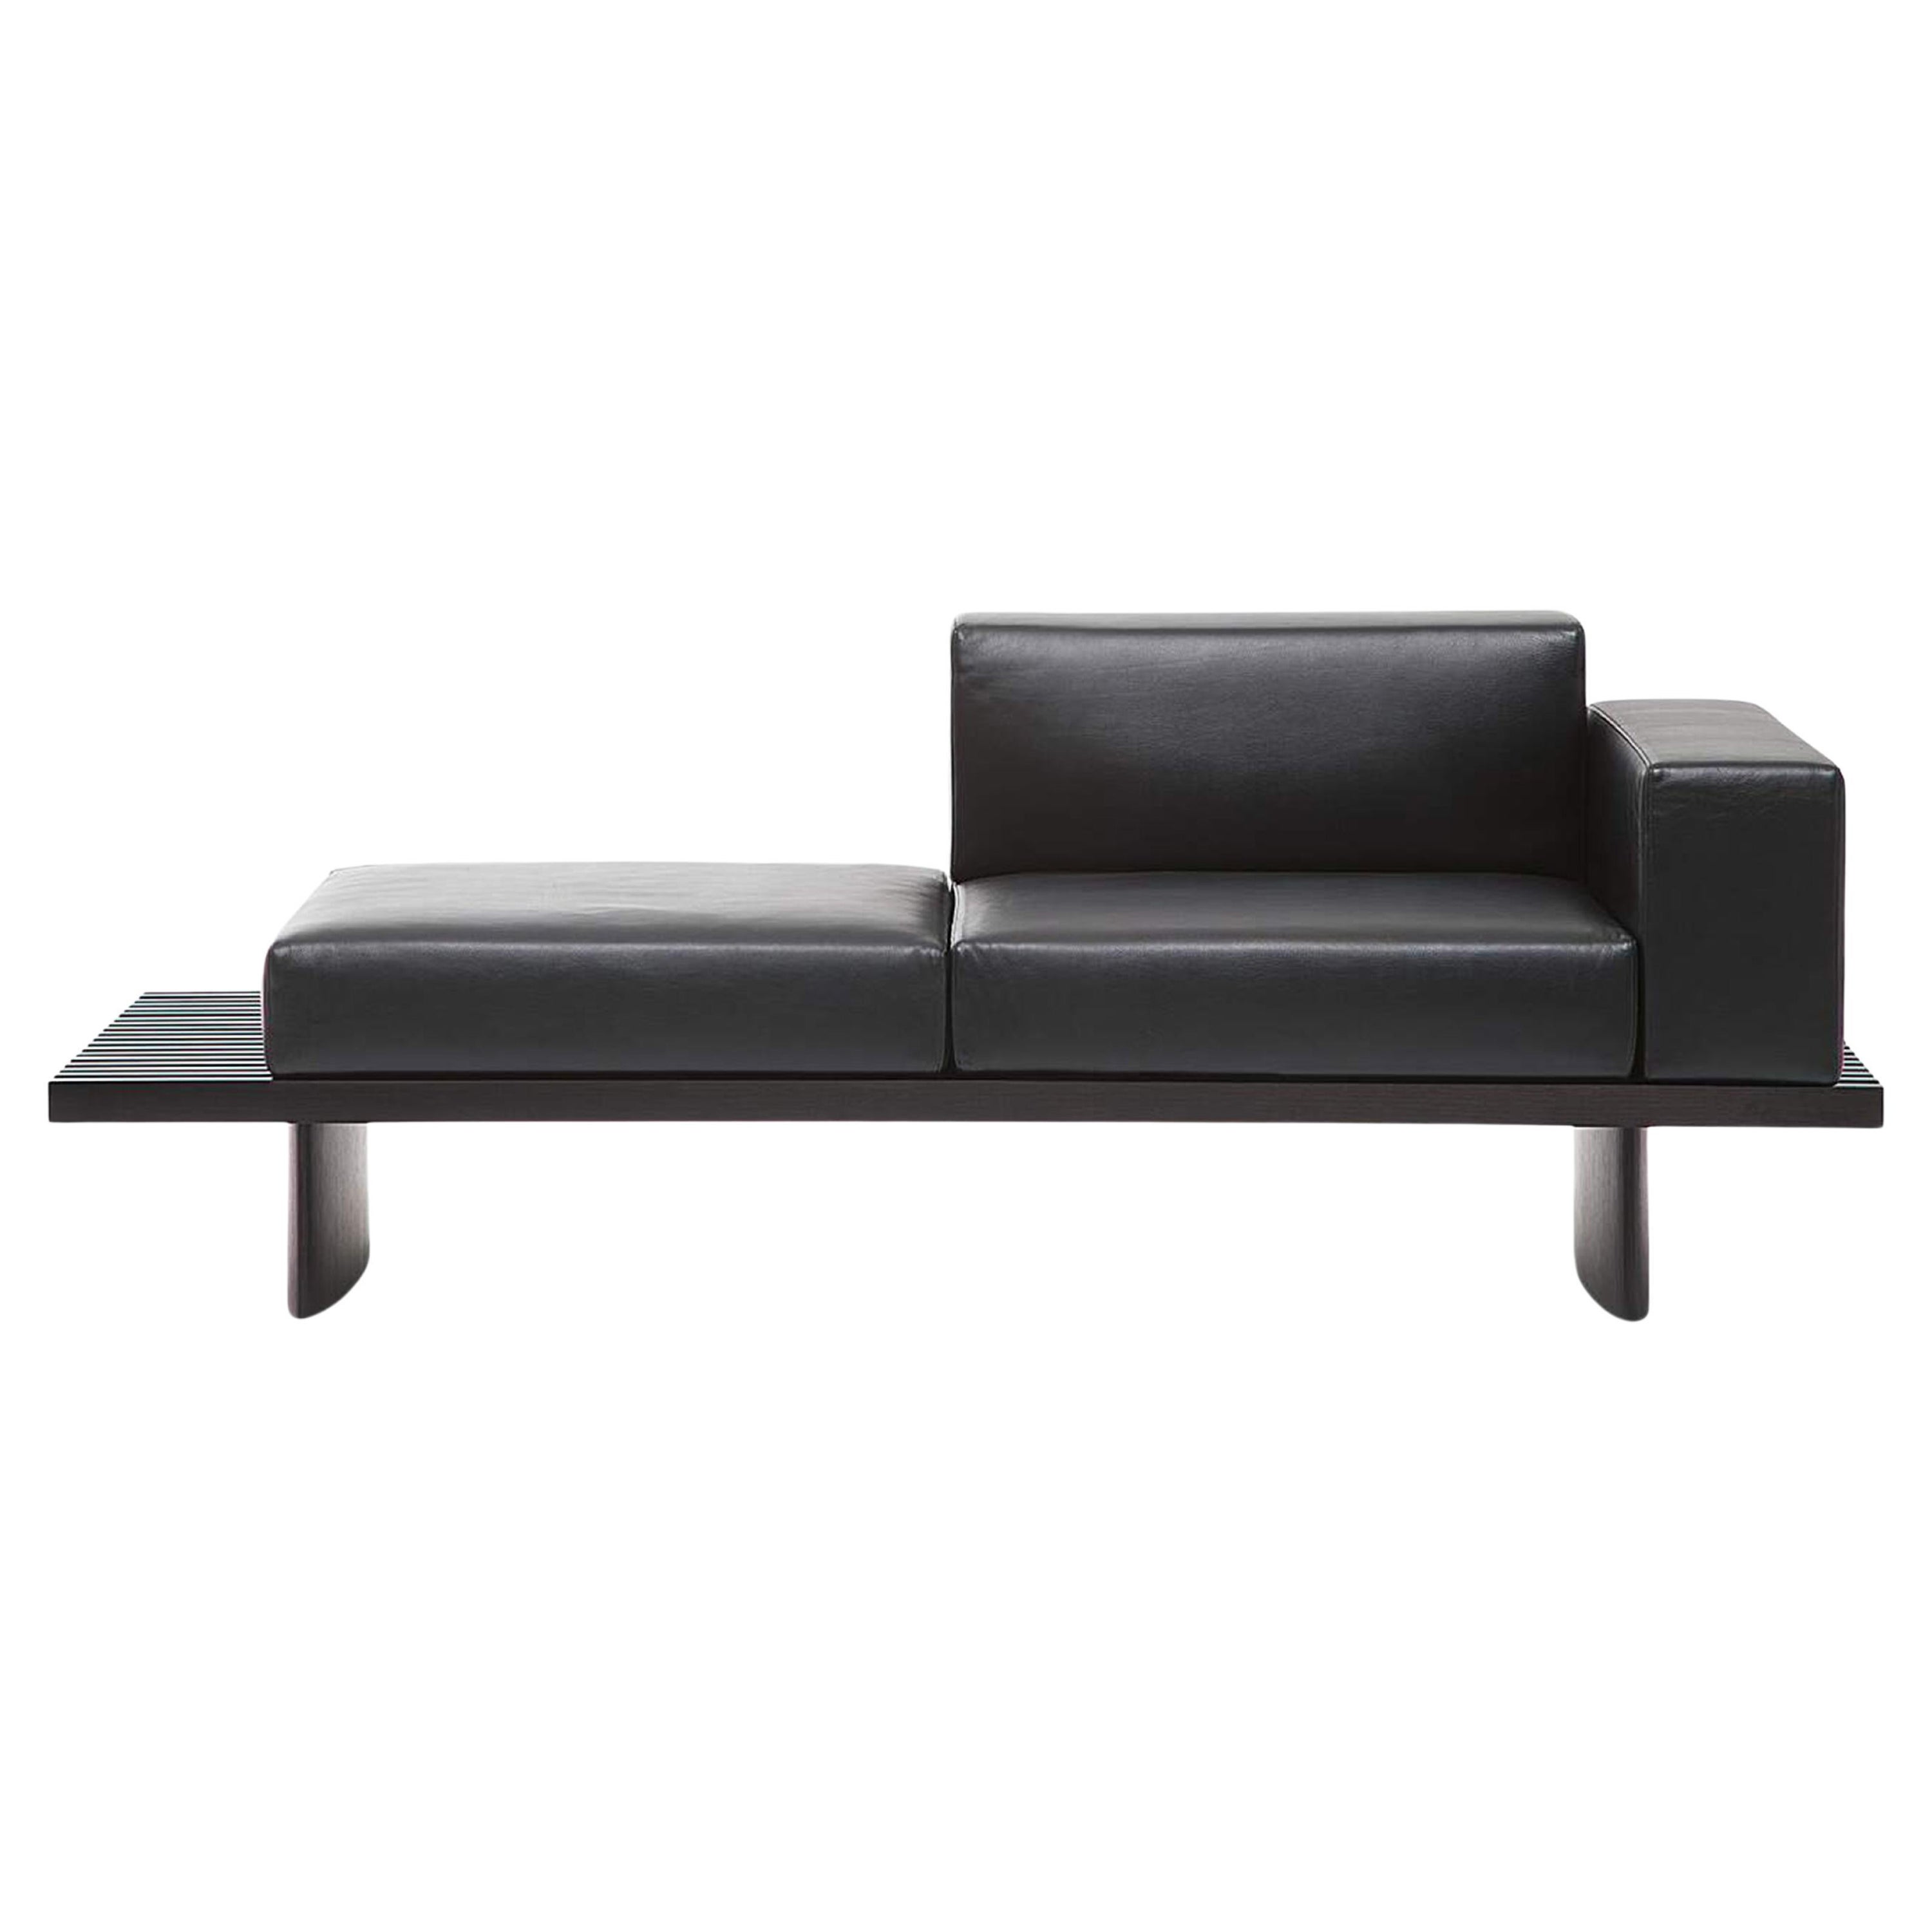 Charlotte Perriand Refolo Modular Sofa, Wood and Black Leather by Cassina For Sale